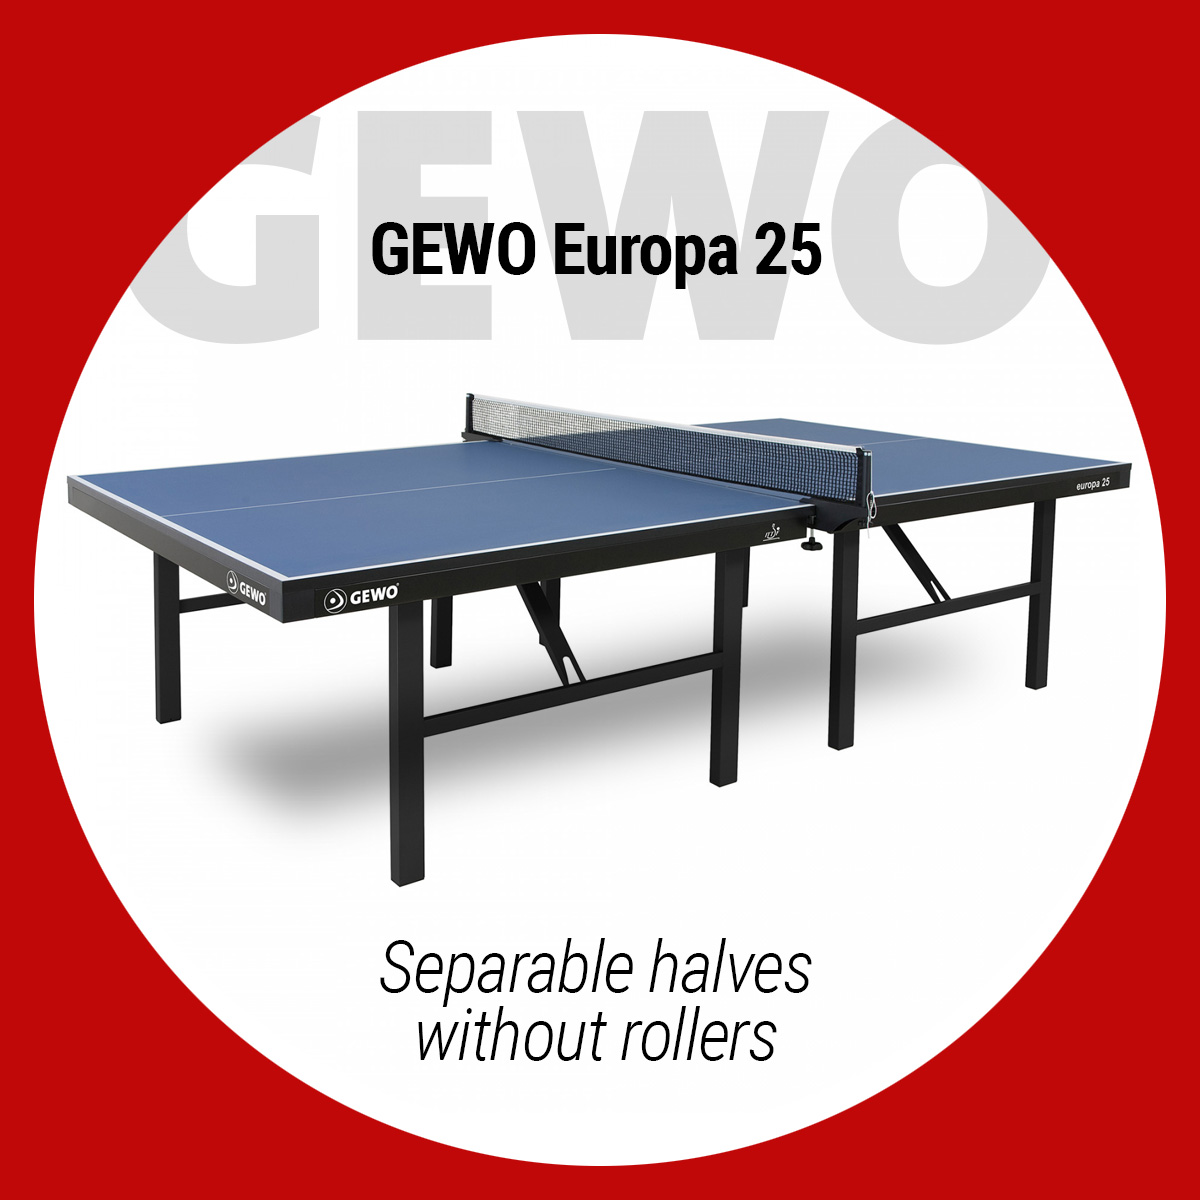 GEWO Europe 25 table tennis table Seperable halves without rollers